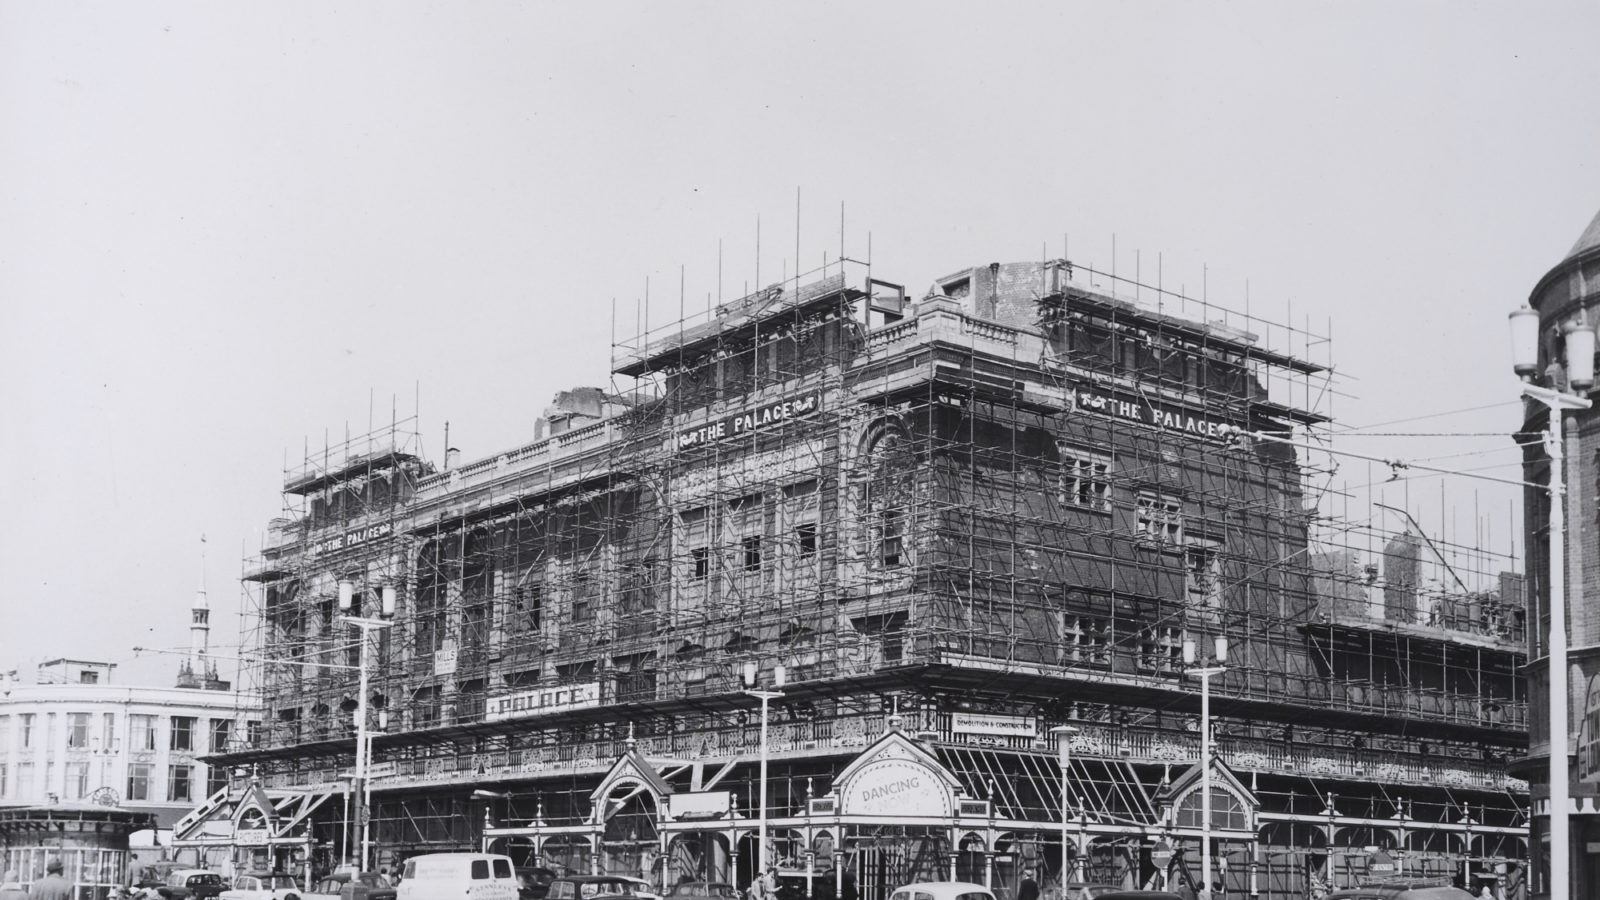 A old black and white photograph of a the Palace, covered in scaffolding